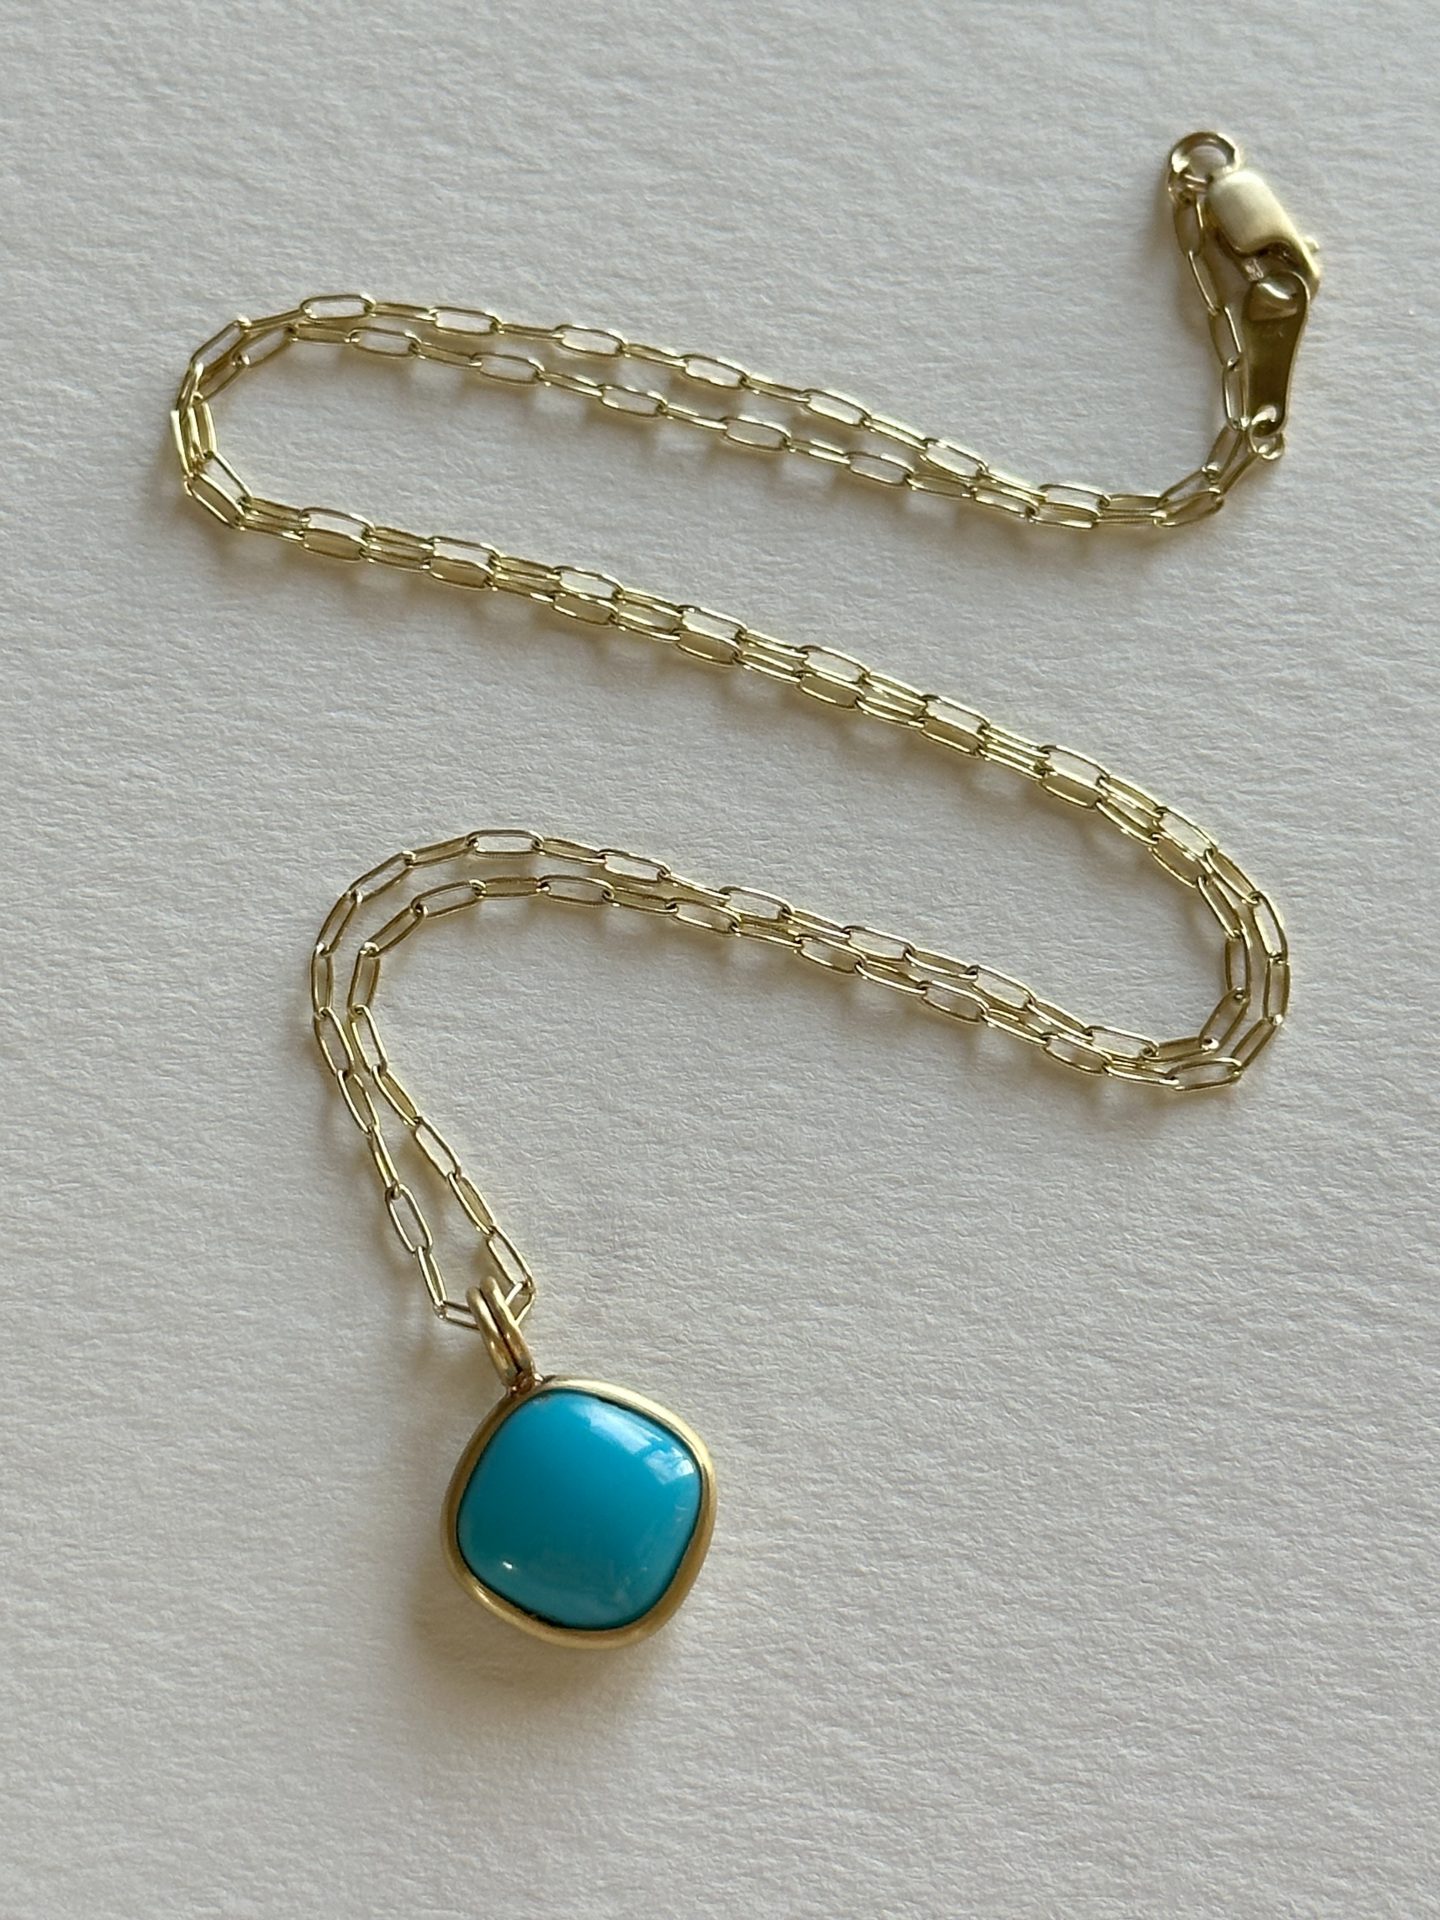 Turquoise “chiclet”